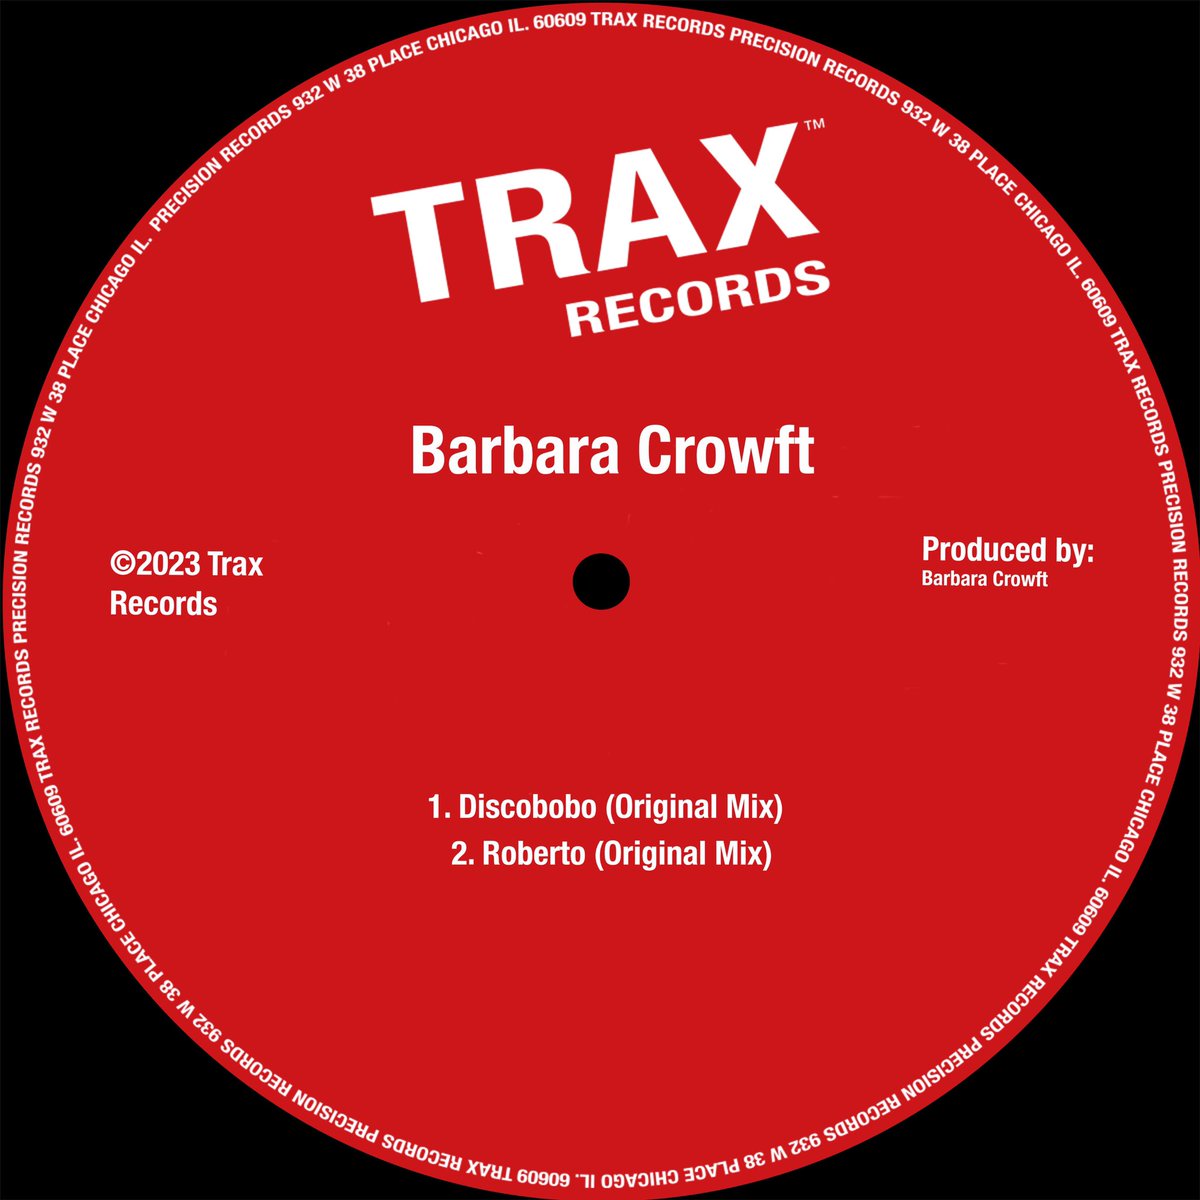 Barbara’s new tracks on the label Trax records is on the way! available on all platforms on March 21, 2023🪩🎶 #HouseMusicAllLifeLong #love #happy #music @TRAXRECORDS